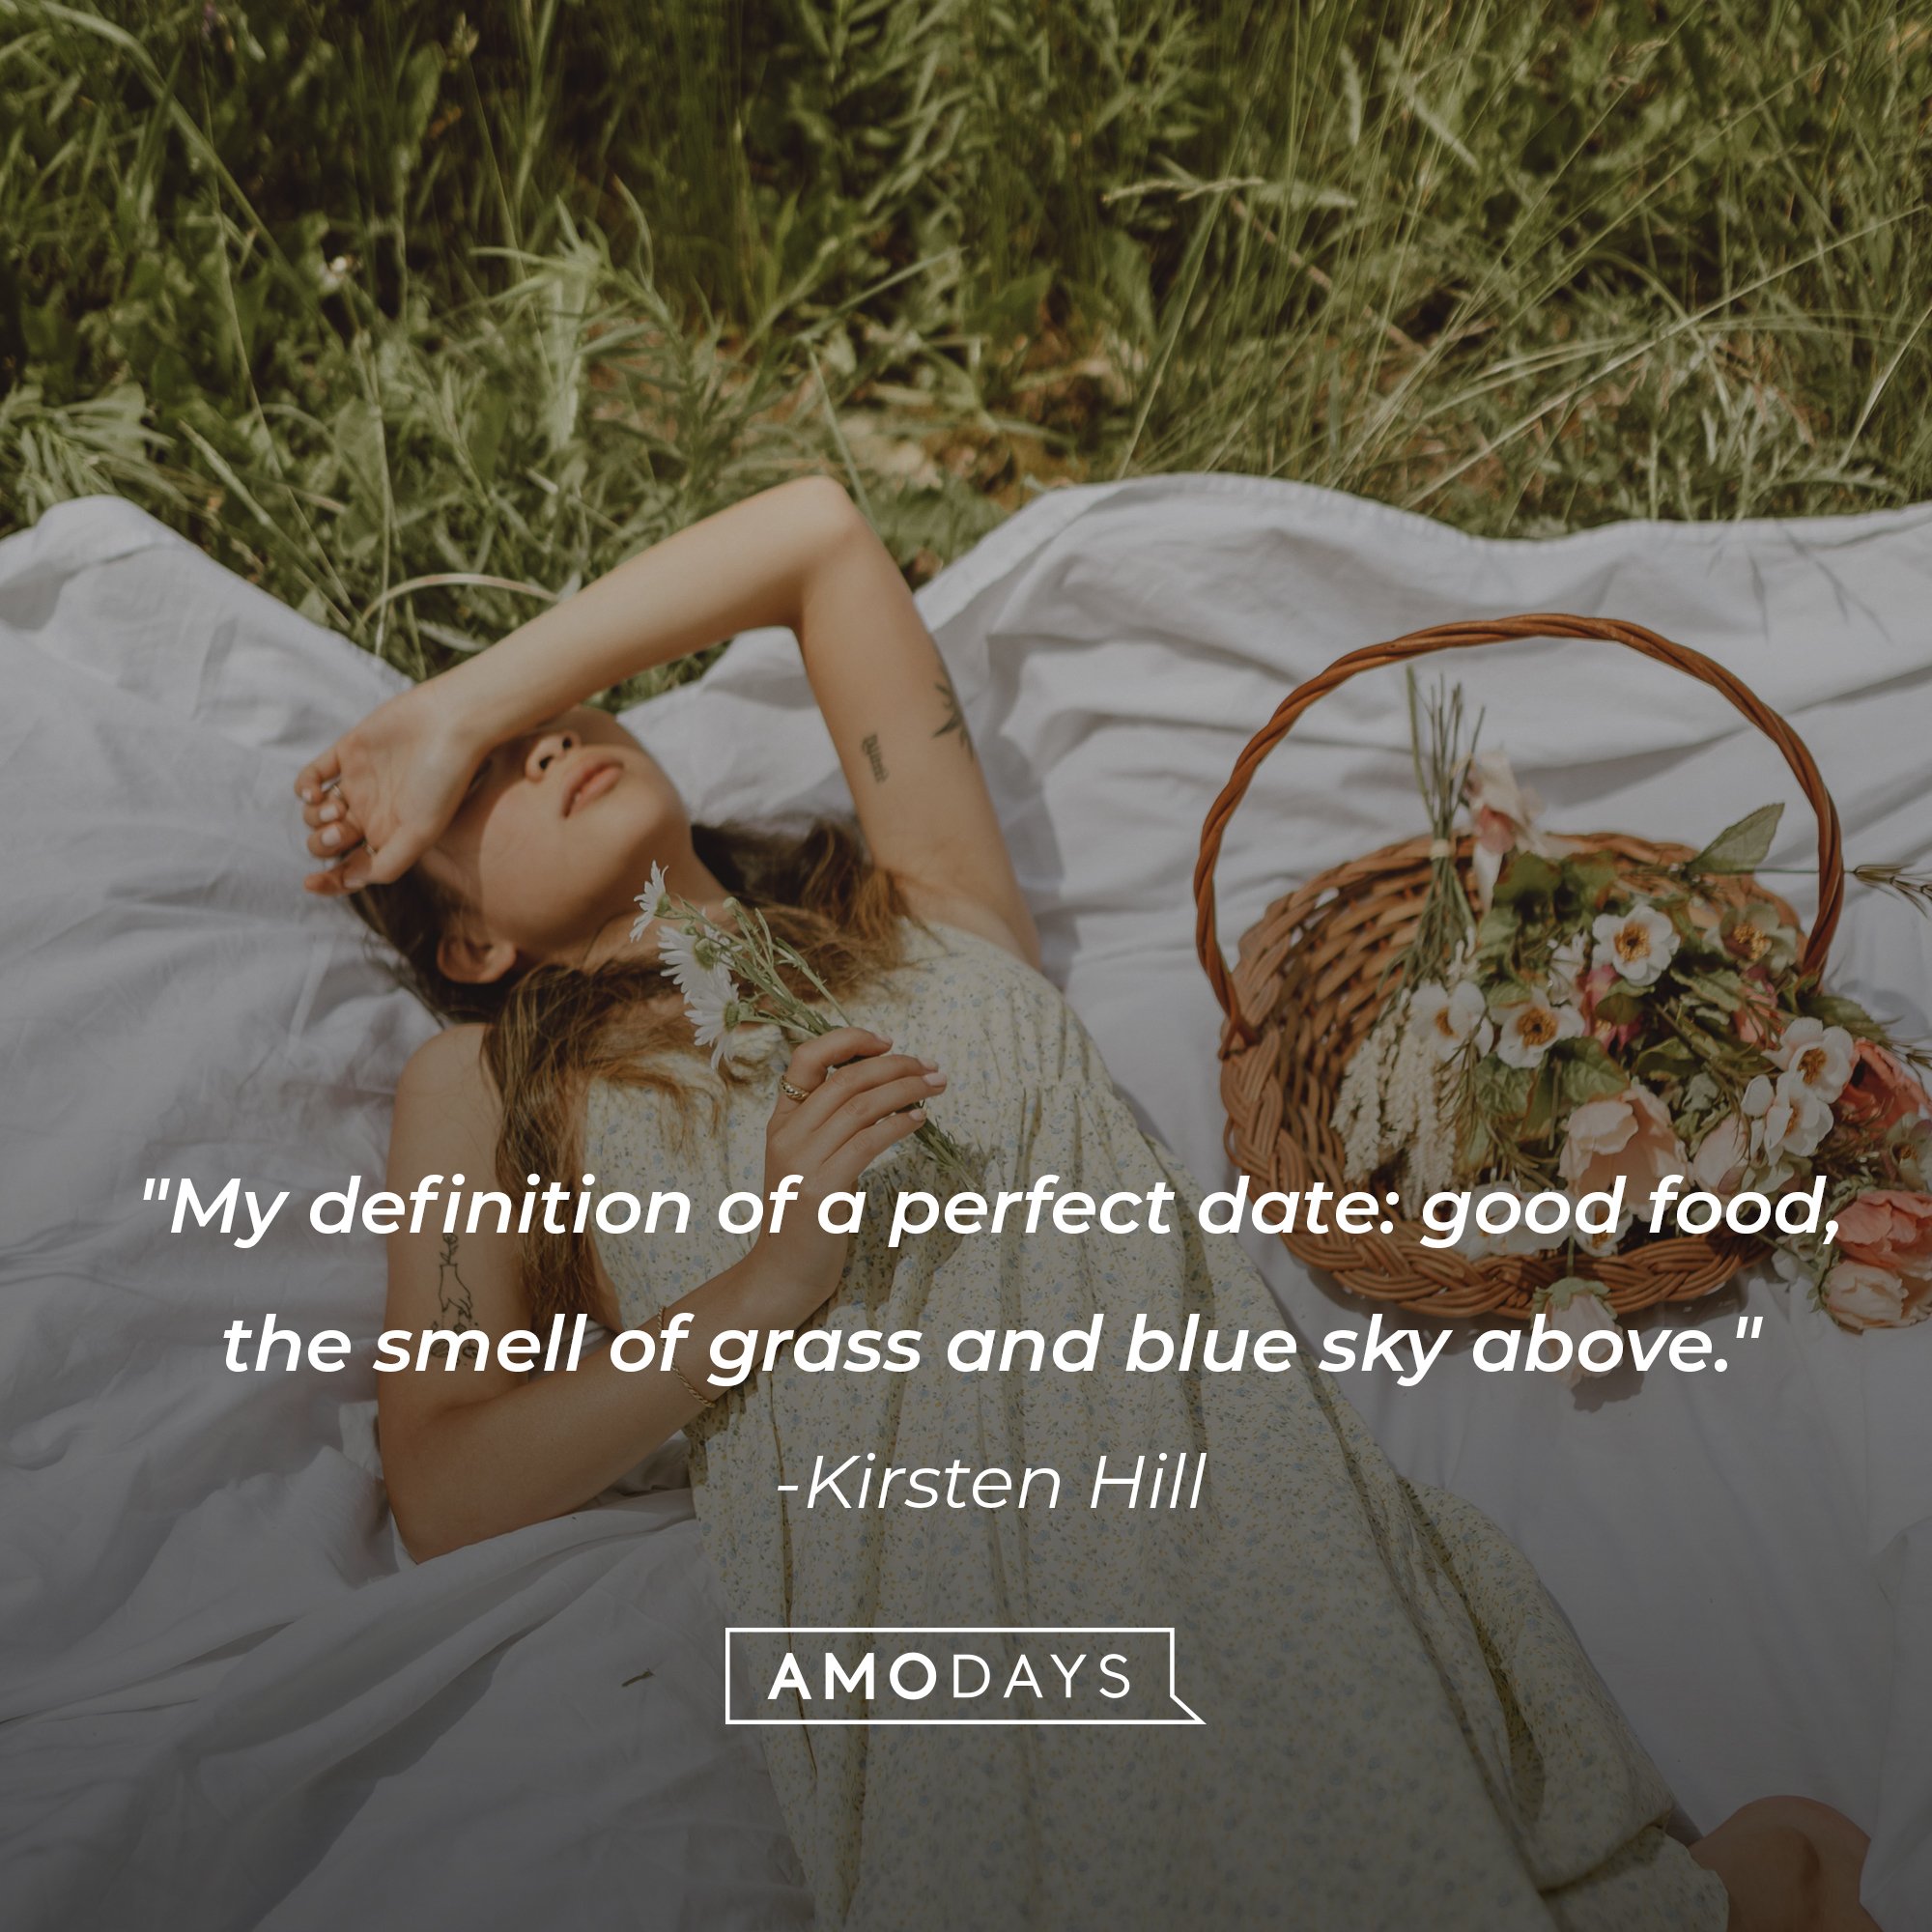 Kirsten Hill's quote: "My definition of a perfect date: good food, the smell of grass and blue sky above." | Image: AmoDays